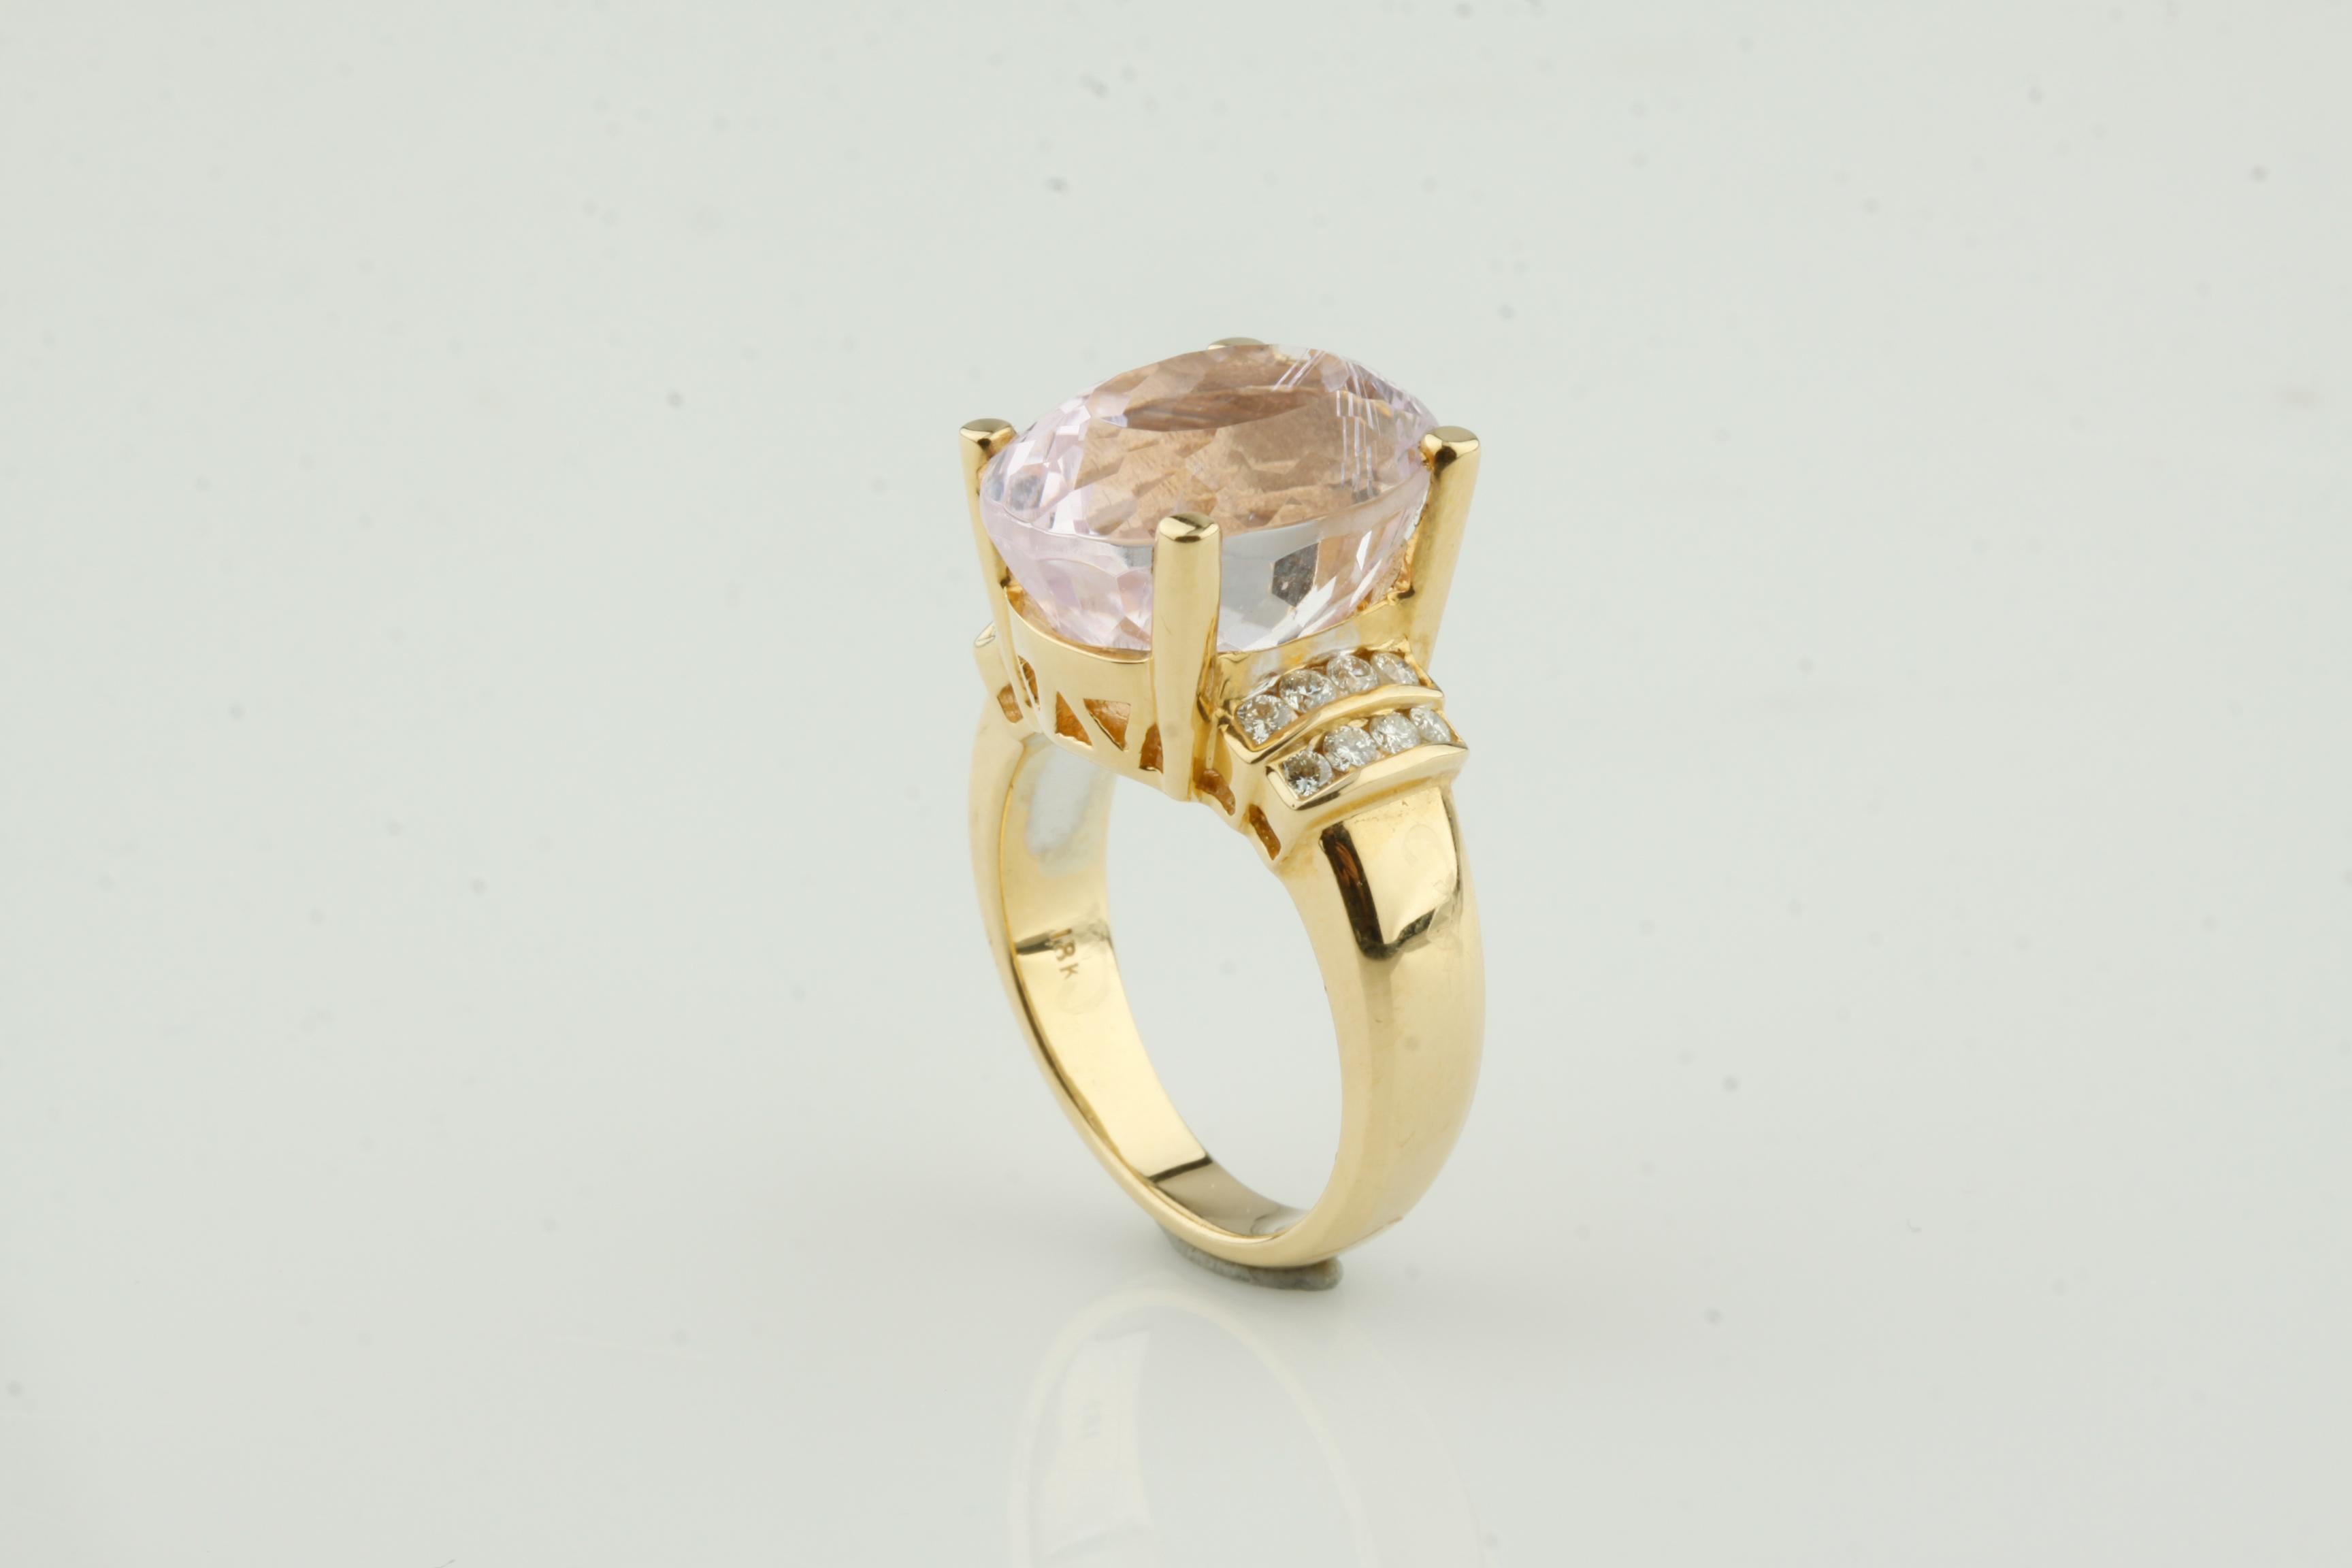 One electronically tested 18KT yellow gold ladies cast kunzite & diamond ring with a bright finish
Ring Size: 6.75
Condition is very good
Featuring a kunzite supported by diamond set shoulders
Completed by a three and one half millimeter wide